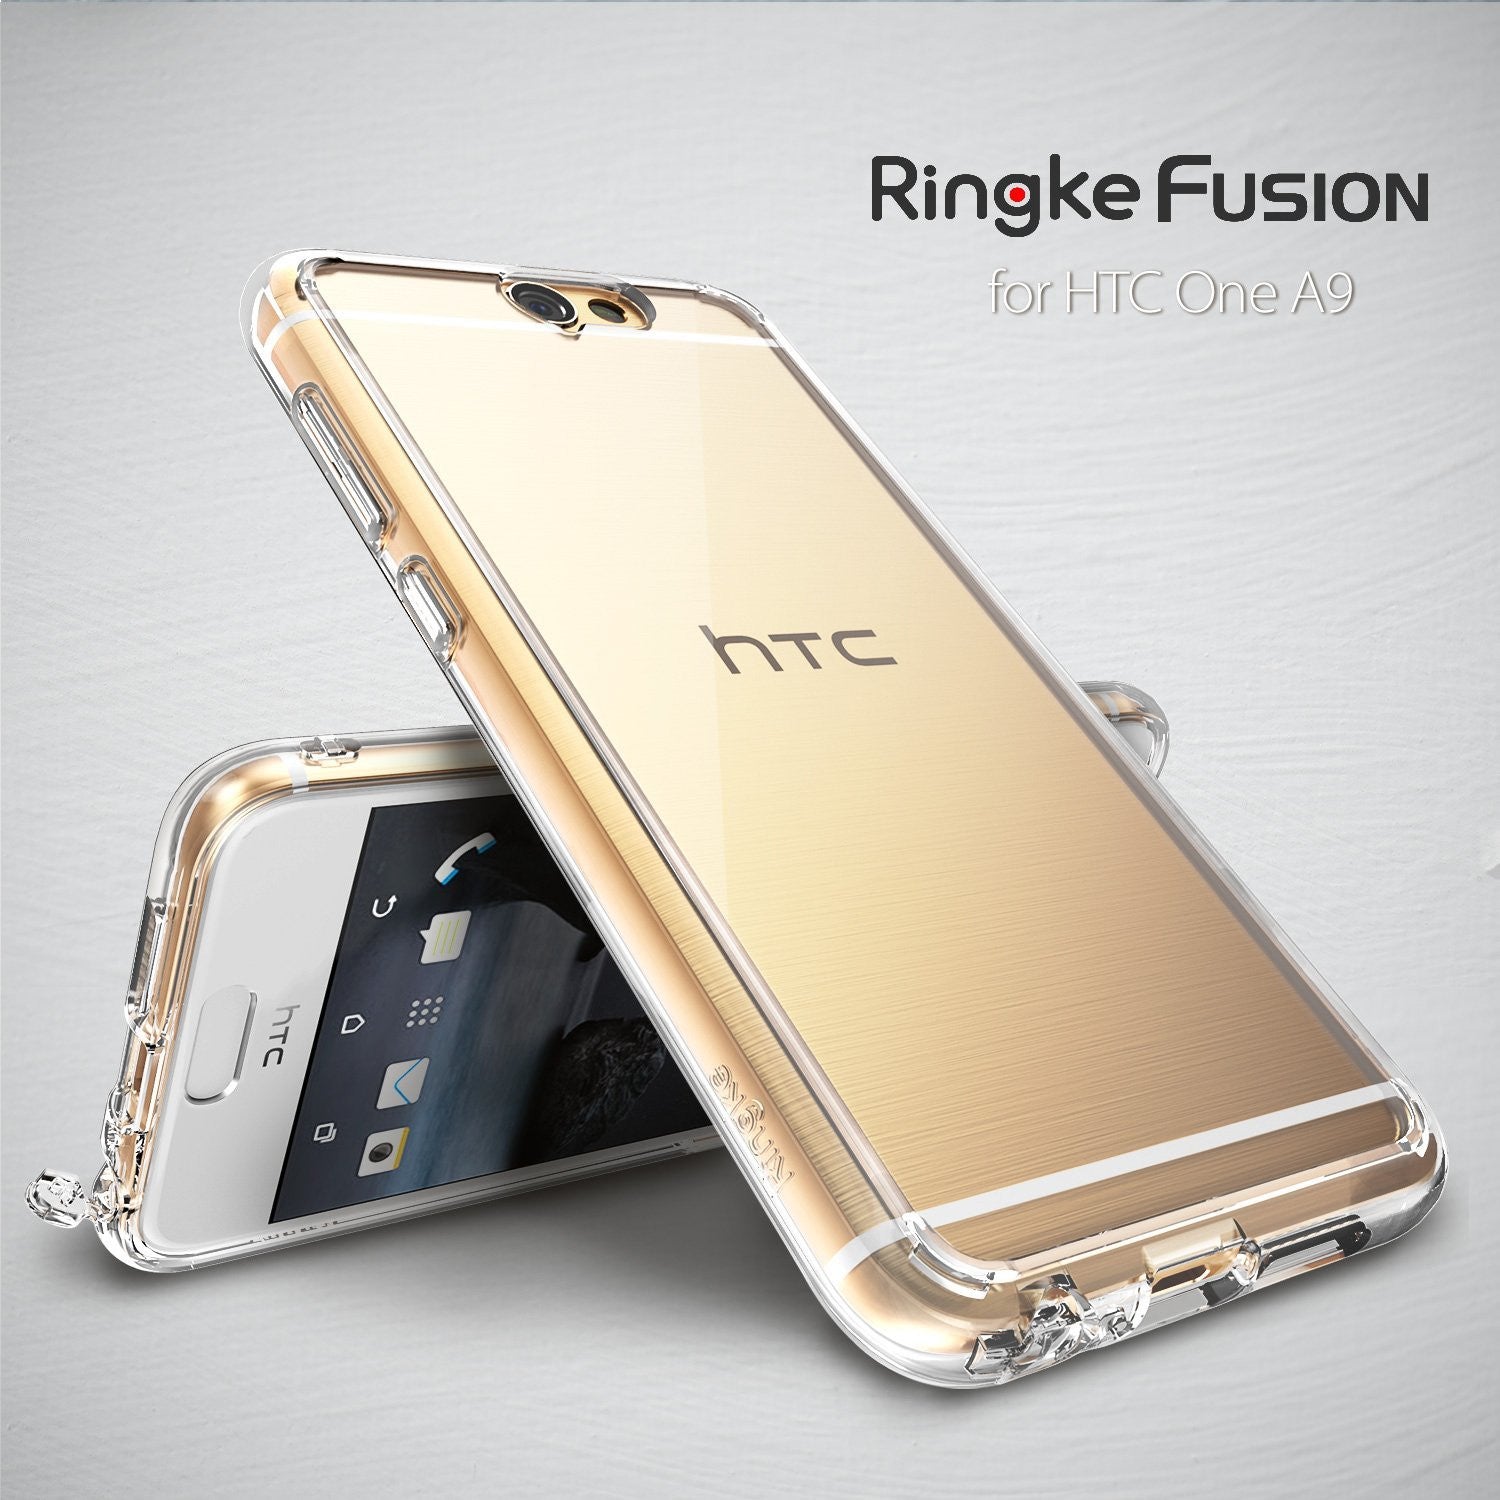 HTC One A9 | Ringke Fusion – Ringke Store